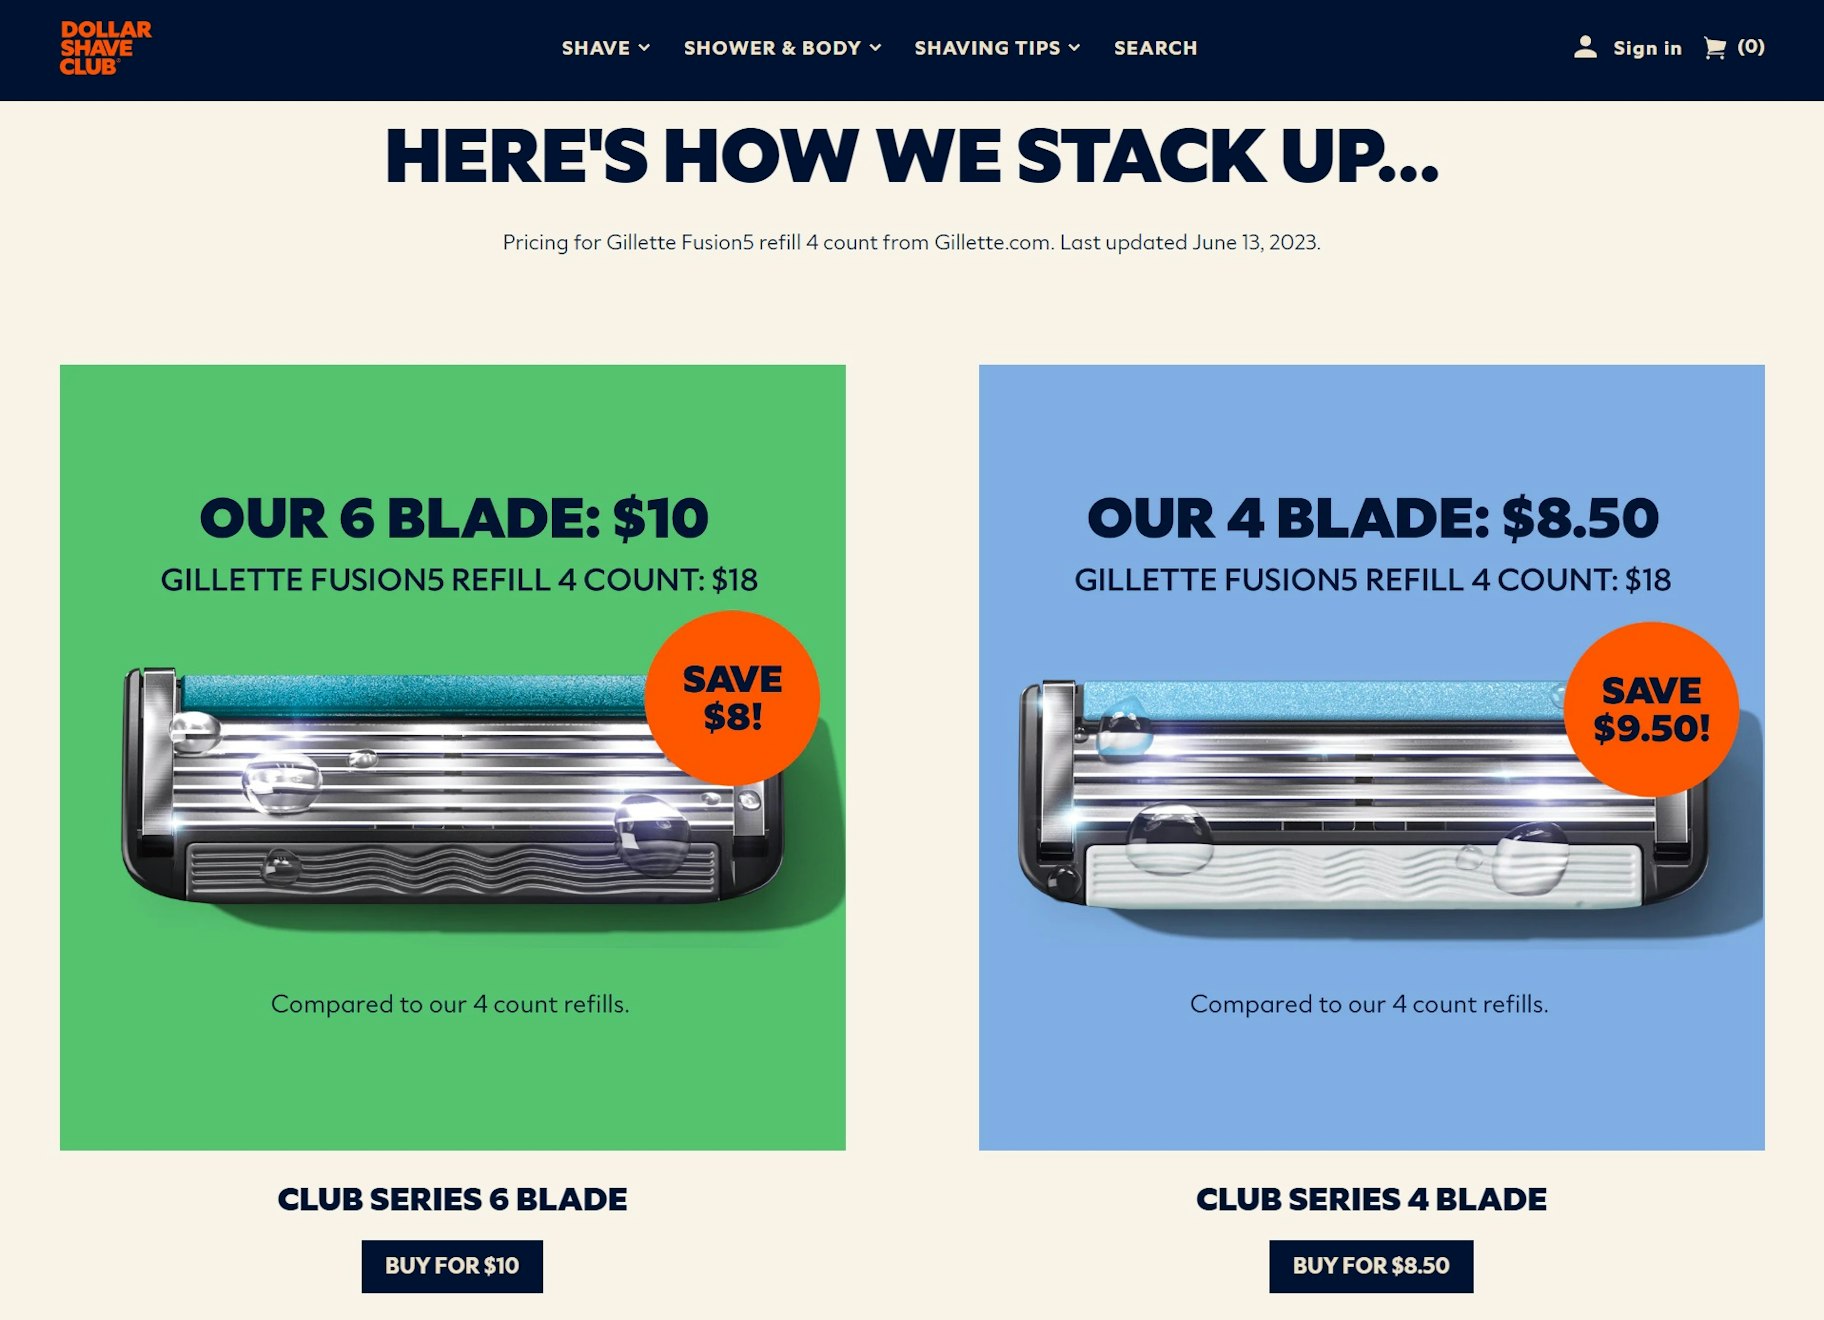 product-market fit example: dollar shave club